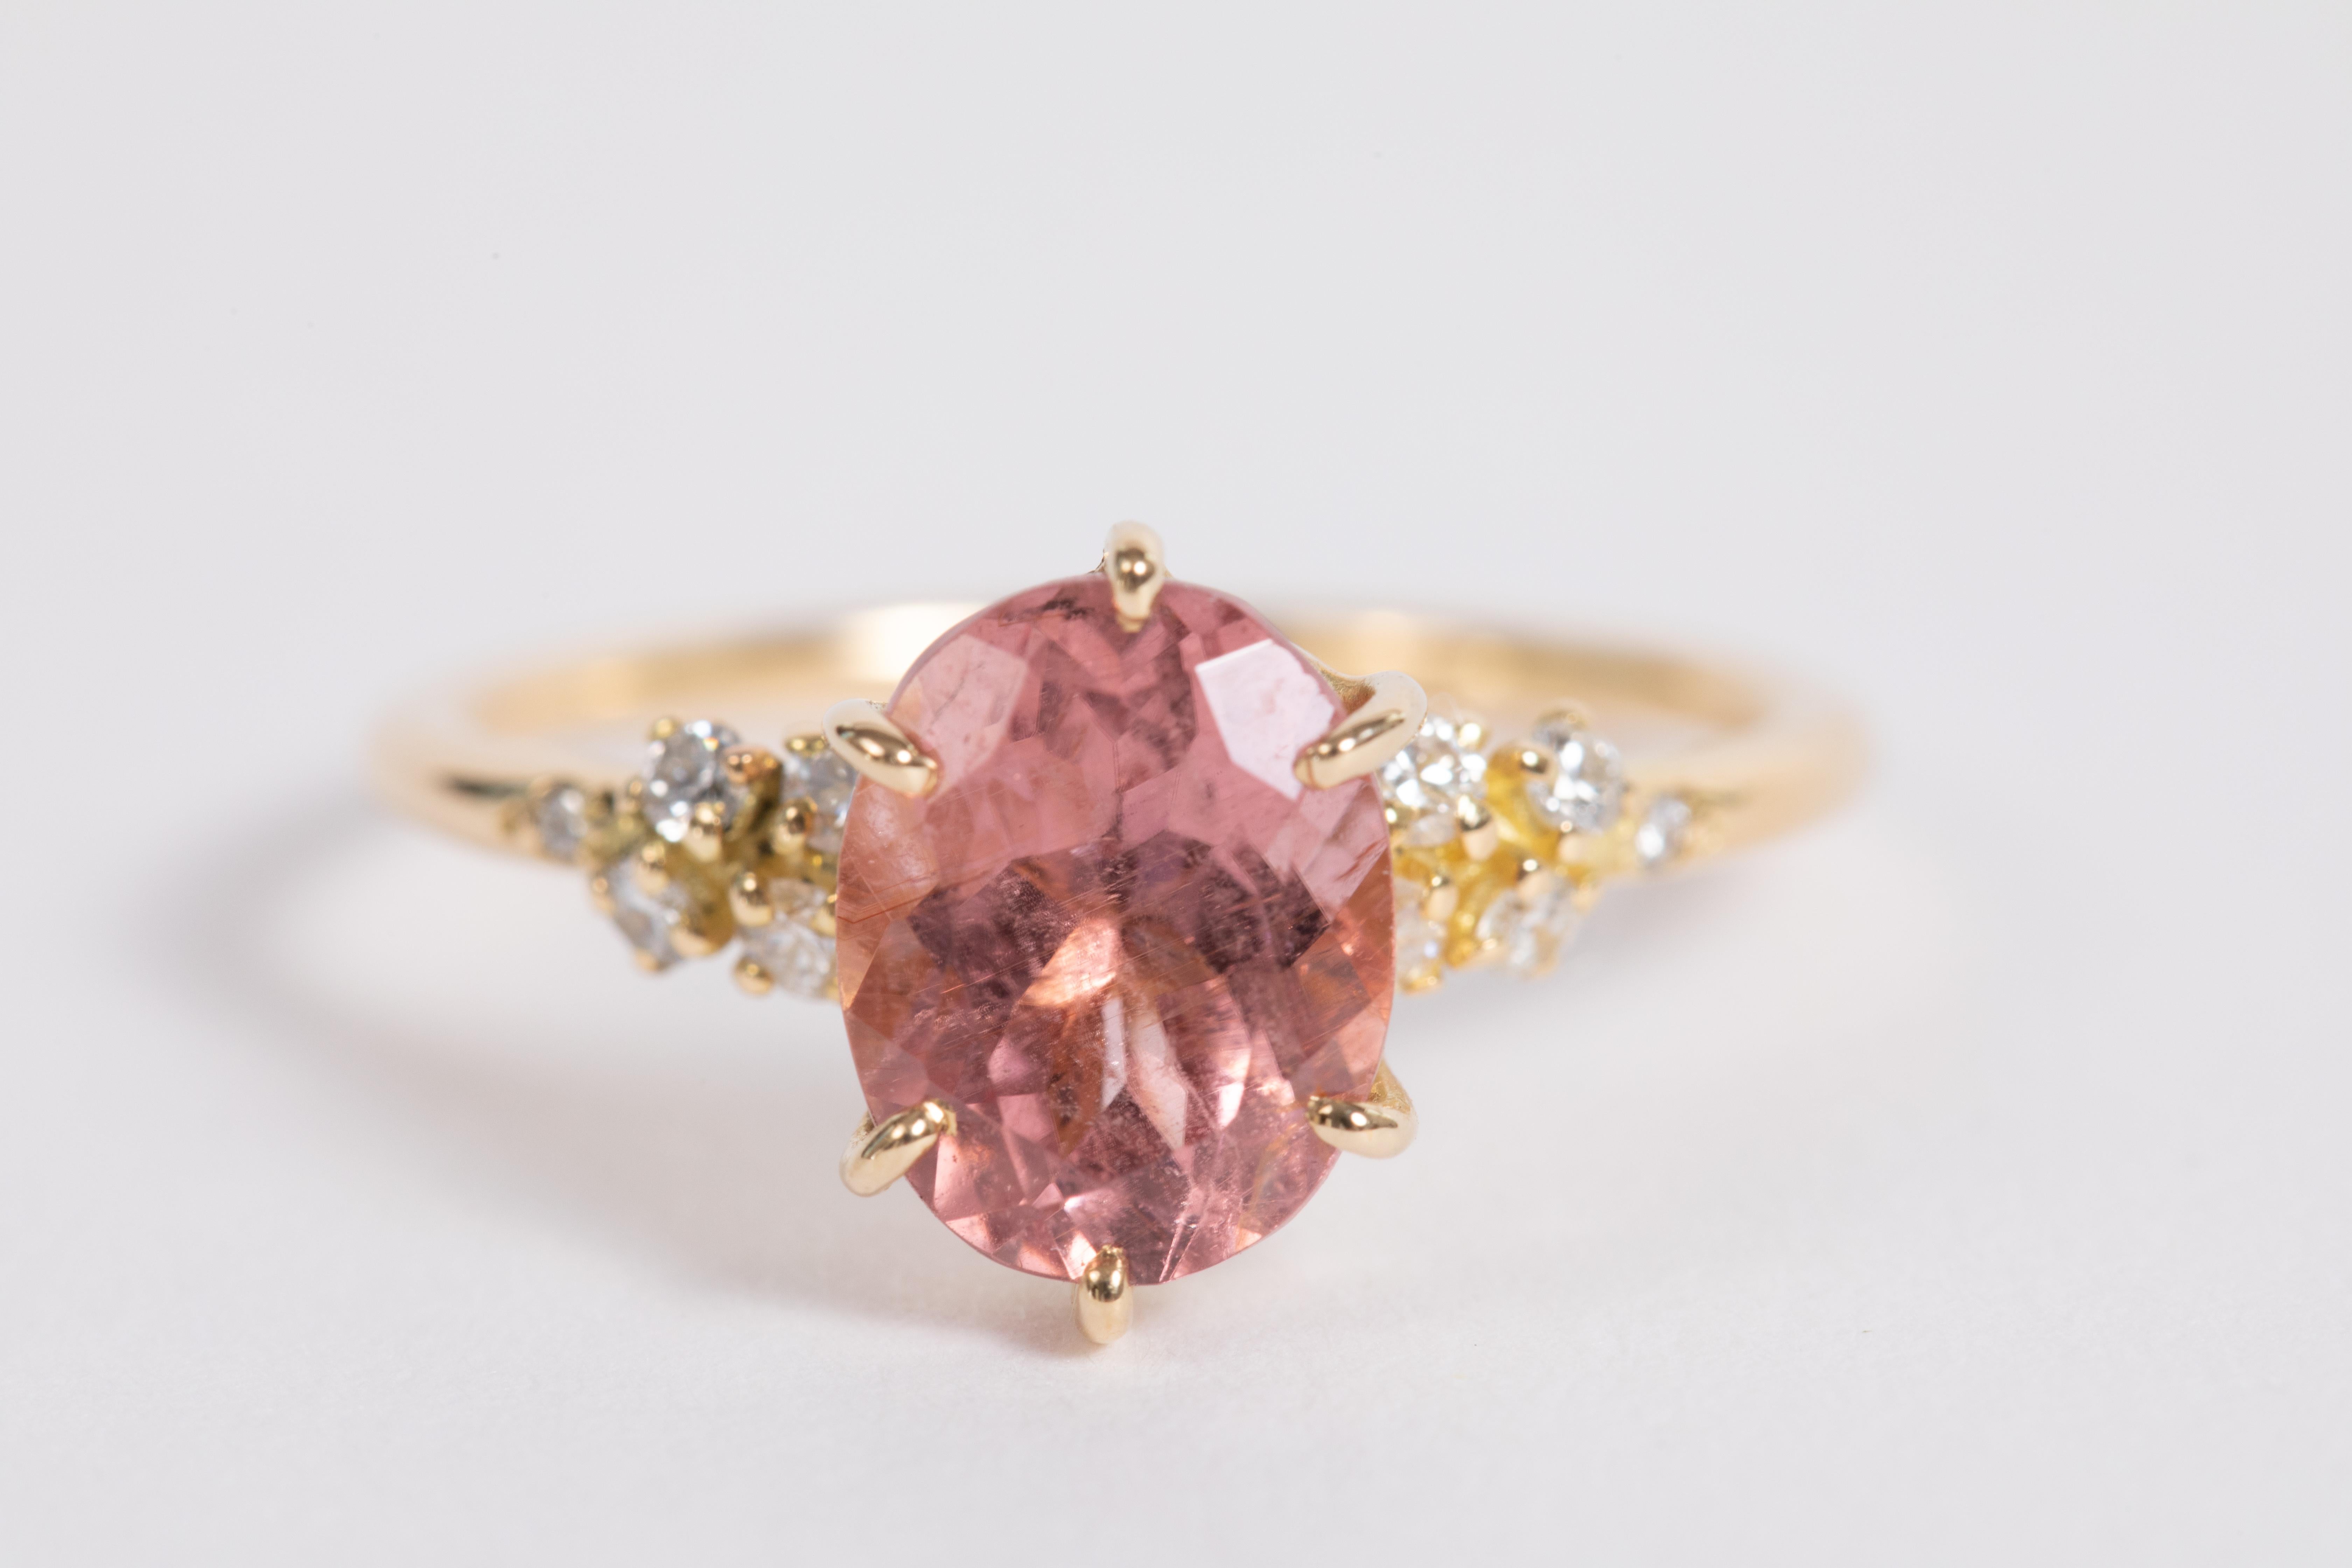 Made of 18K yellow gold, this charming and delicate ring is set with a pink tourmaline ovale and white diamonds on the mount.
Ring total weight : 2,70 g
Pink tourmaline weight : 2,01 carat
Diamonds weight : 0,16 carat

Unique piece, Size  US 6 1/2